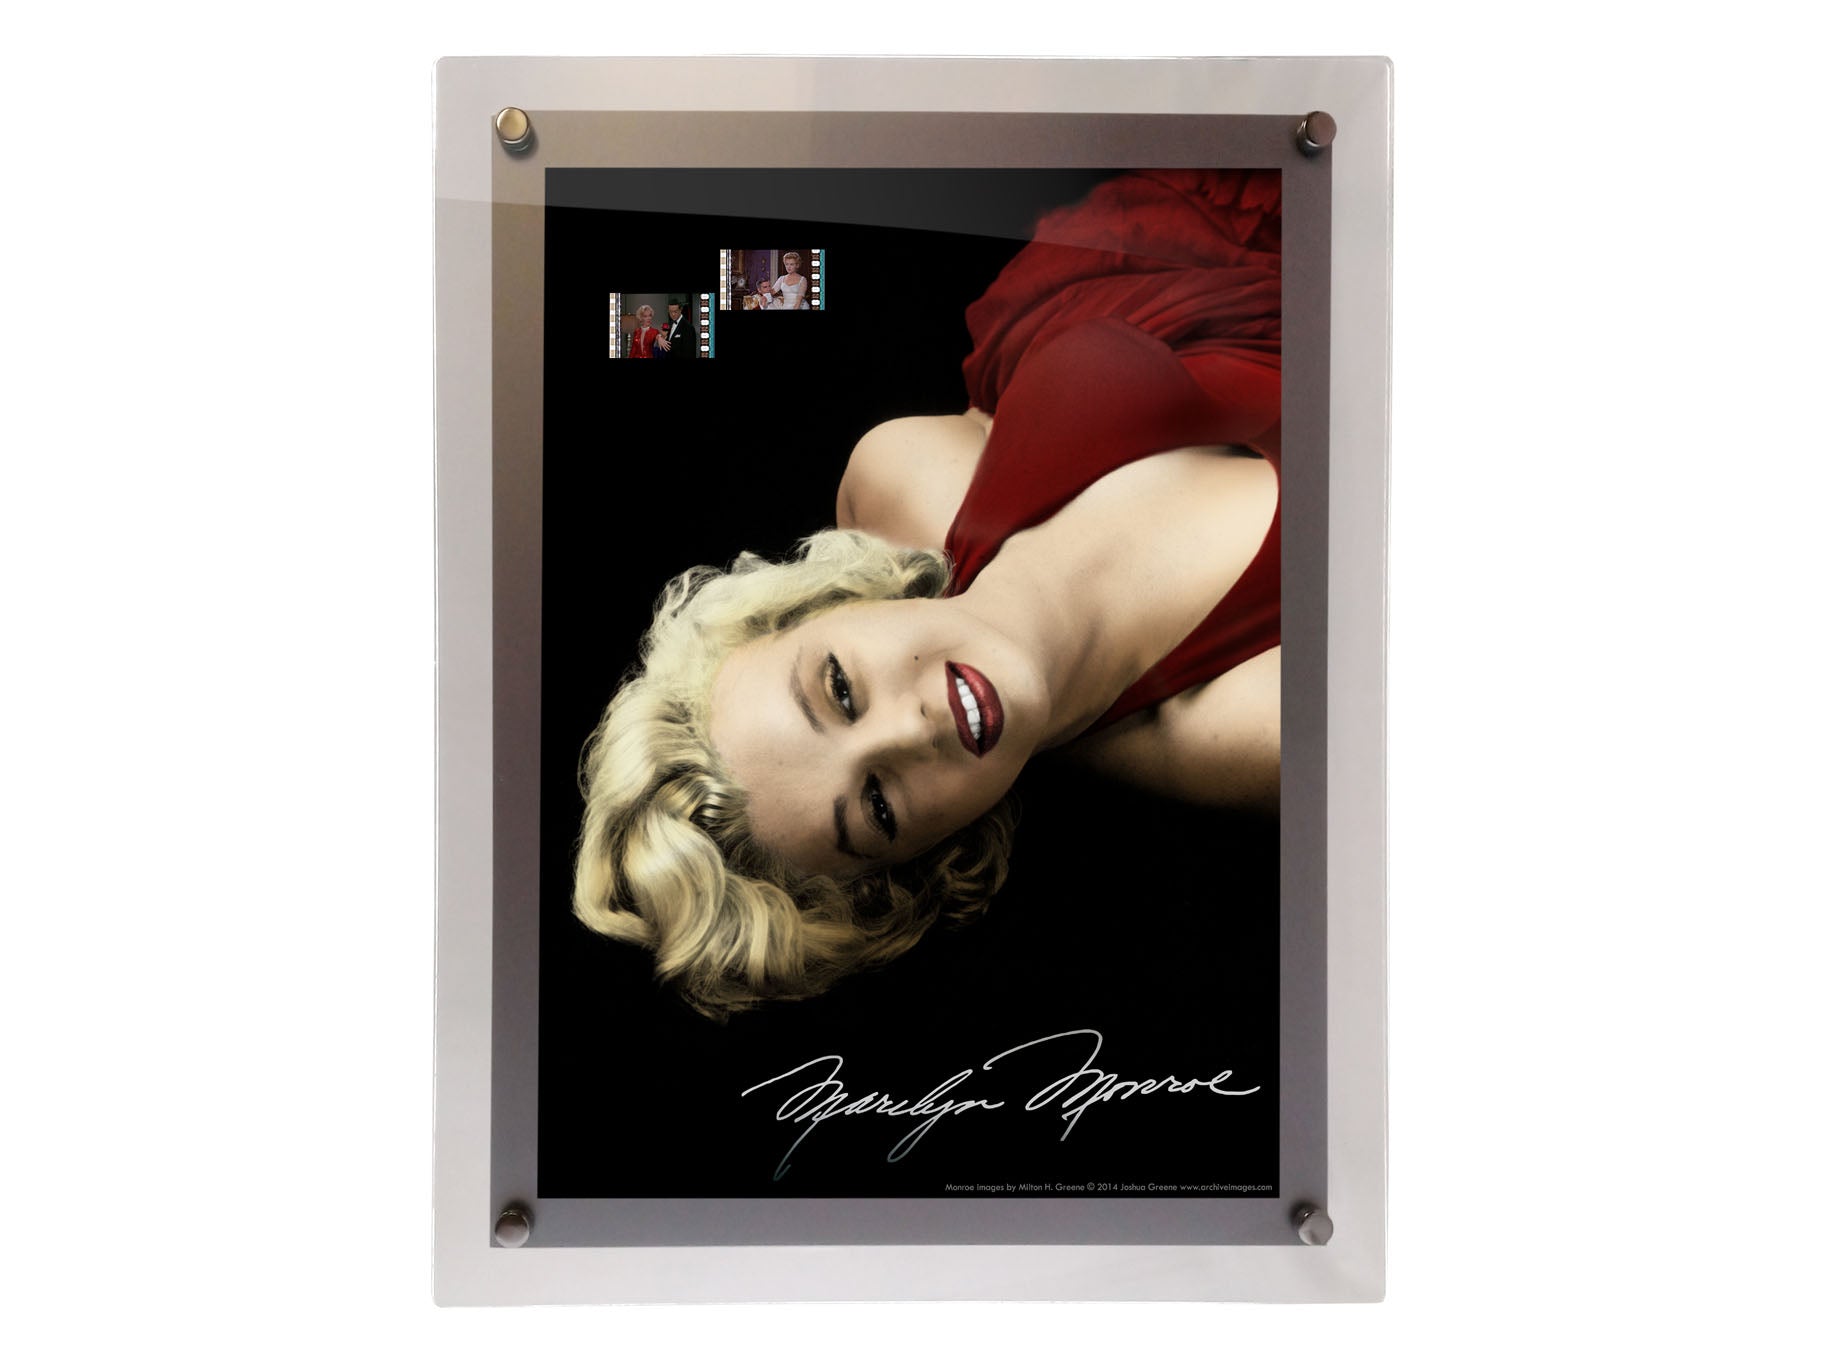 Marilyn Monroe (Red Dress) LightCell FilmCells Presentation with LED Frame LC10140006